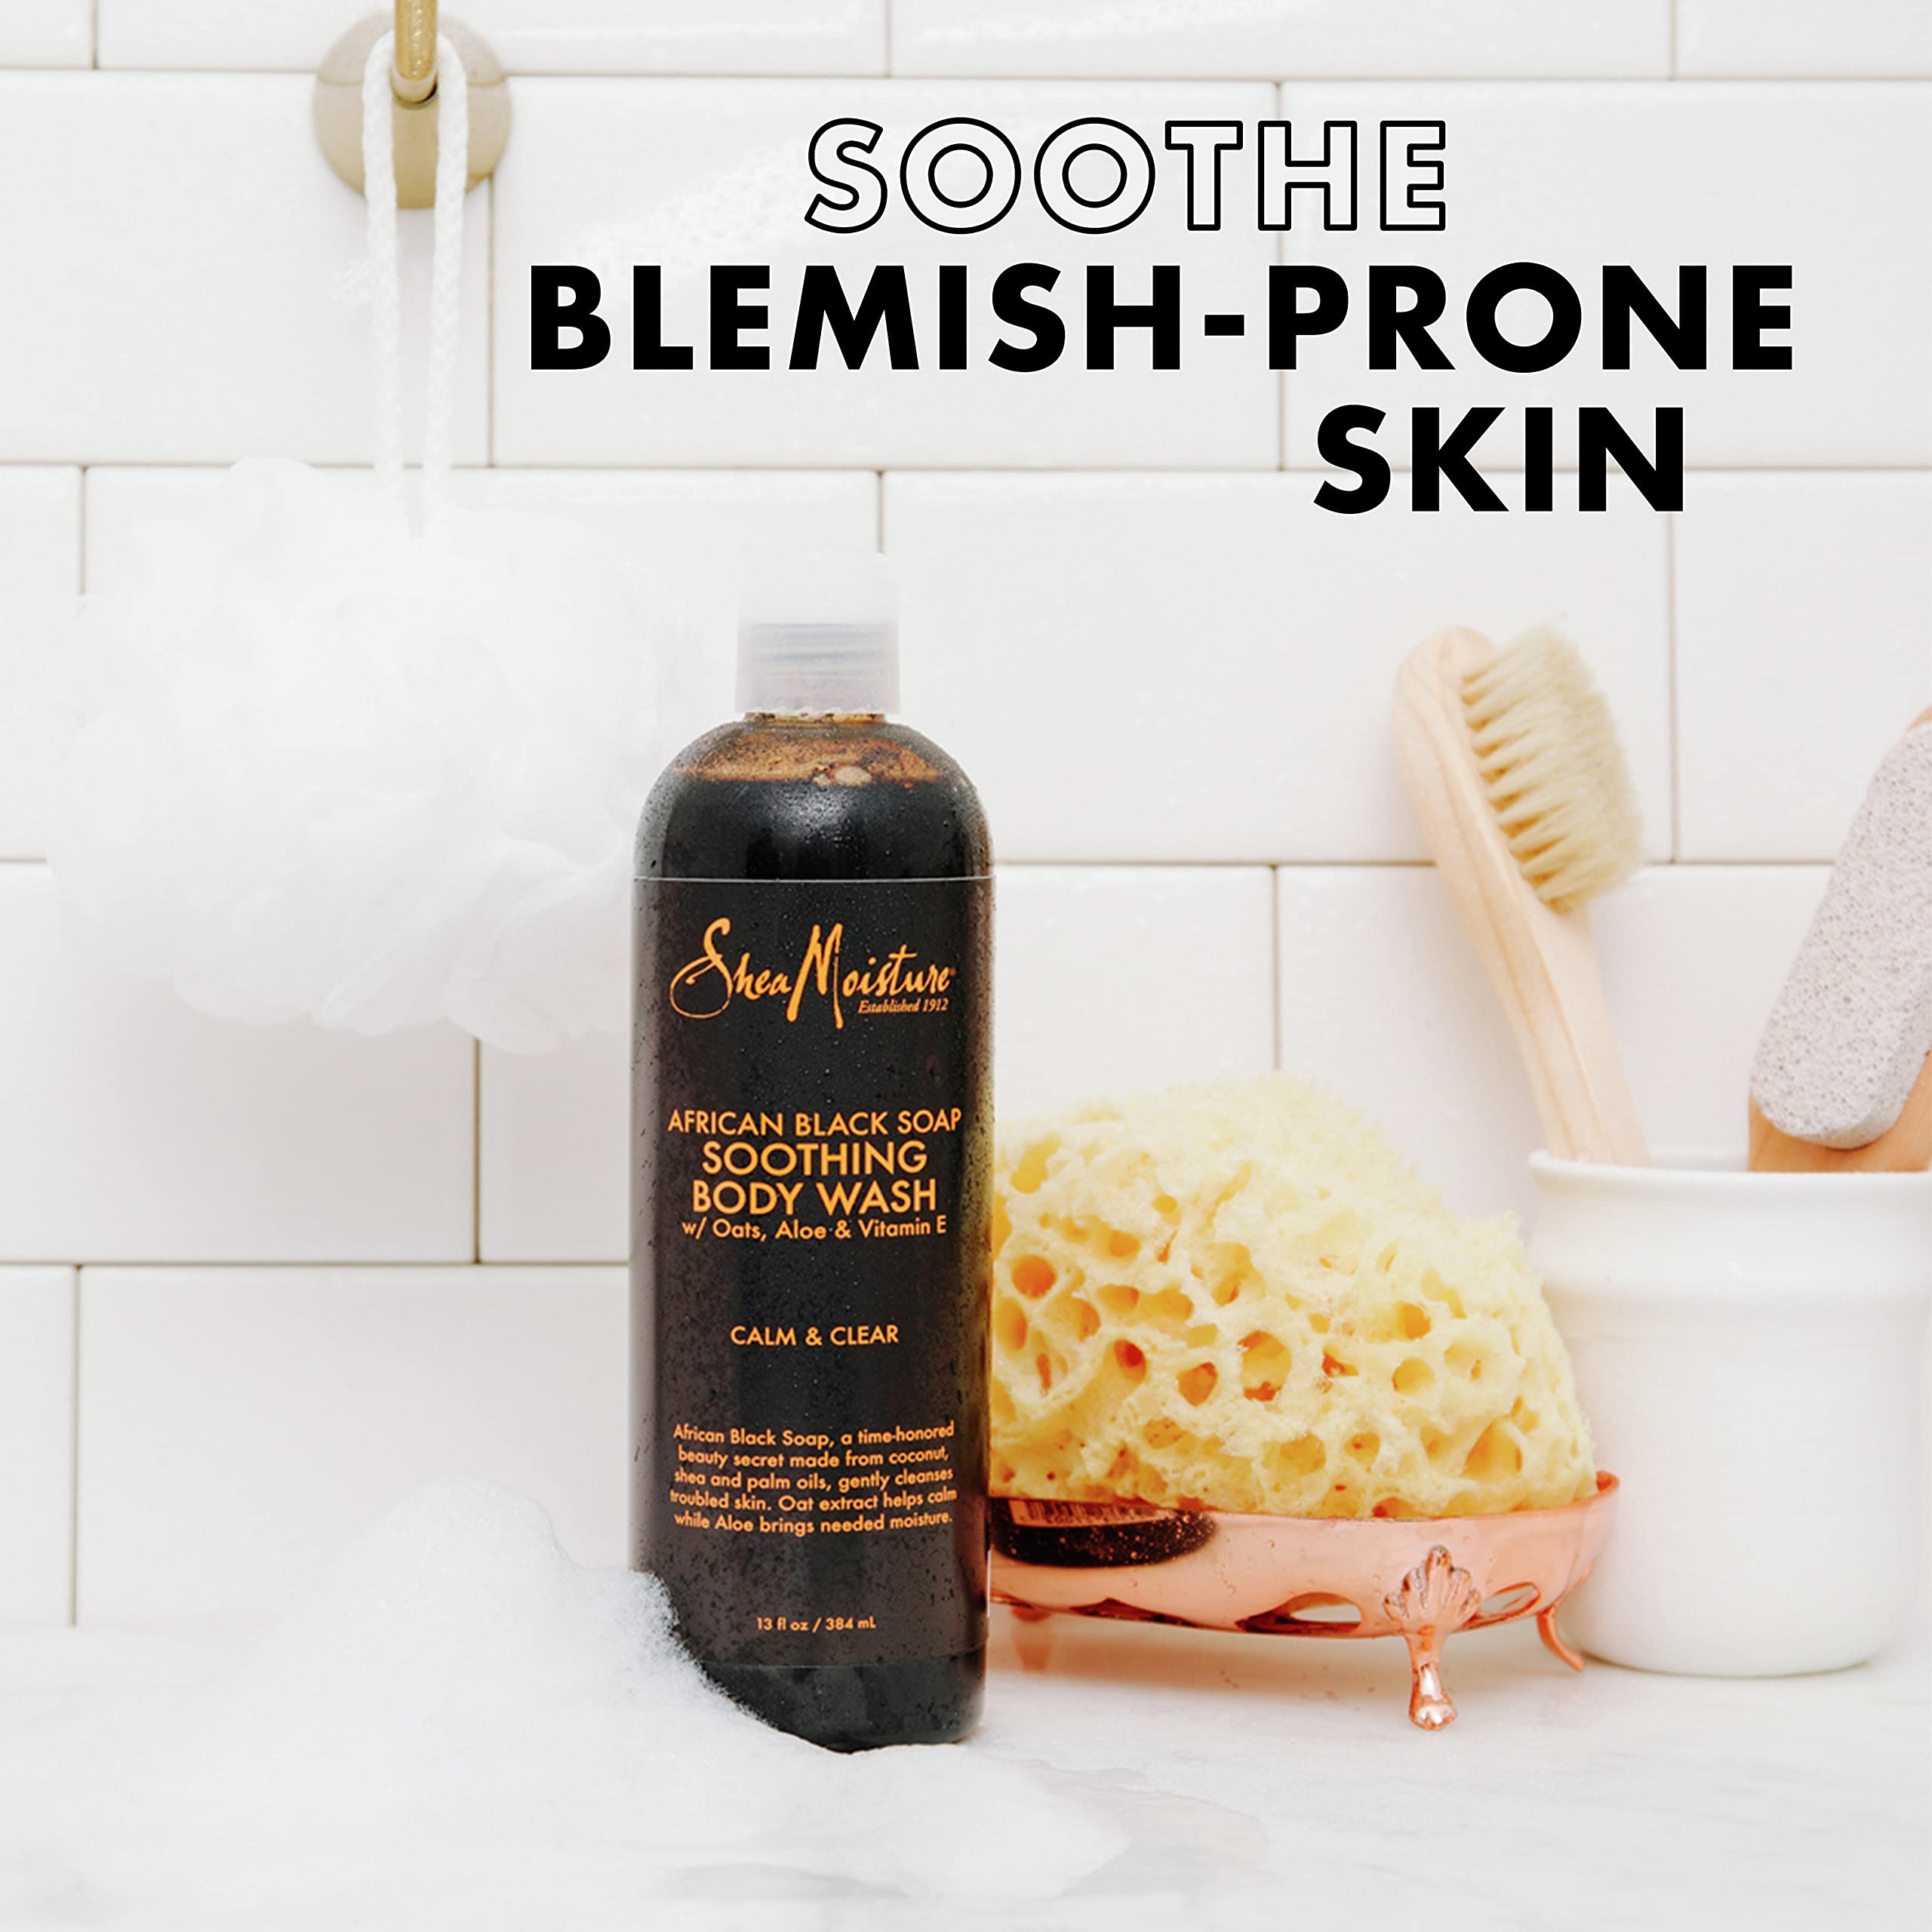 SheaMoisture Soothing Body Wash for Acne Treatment African Black Soap Paraben Free Body Wash 13 oz